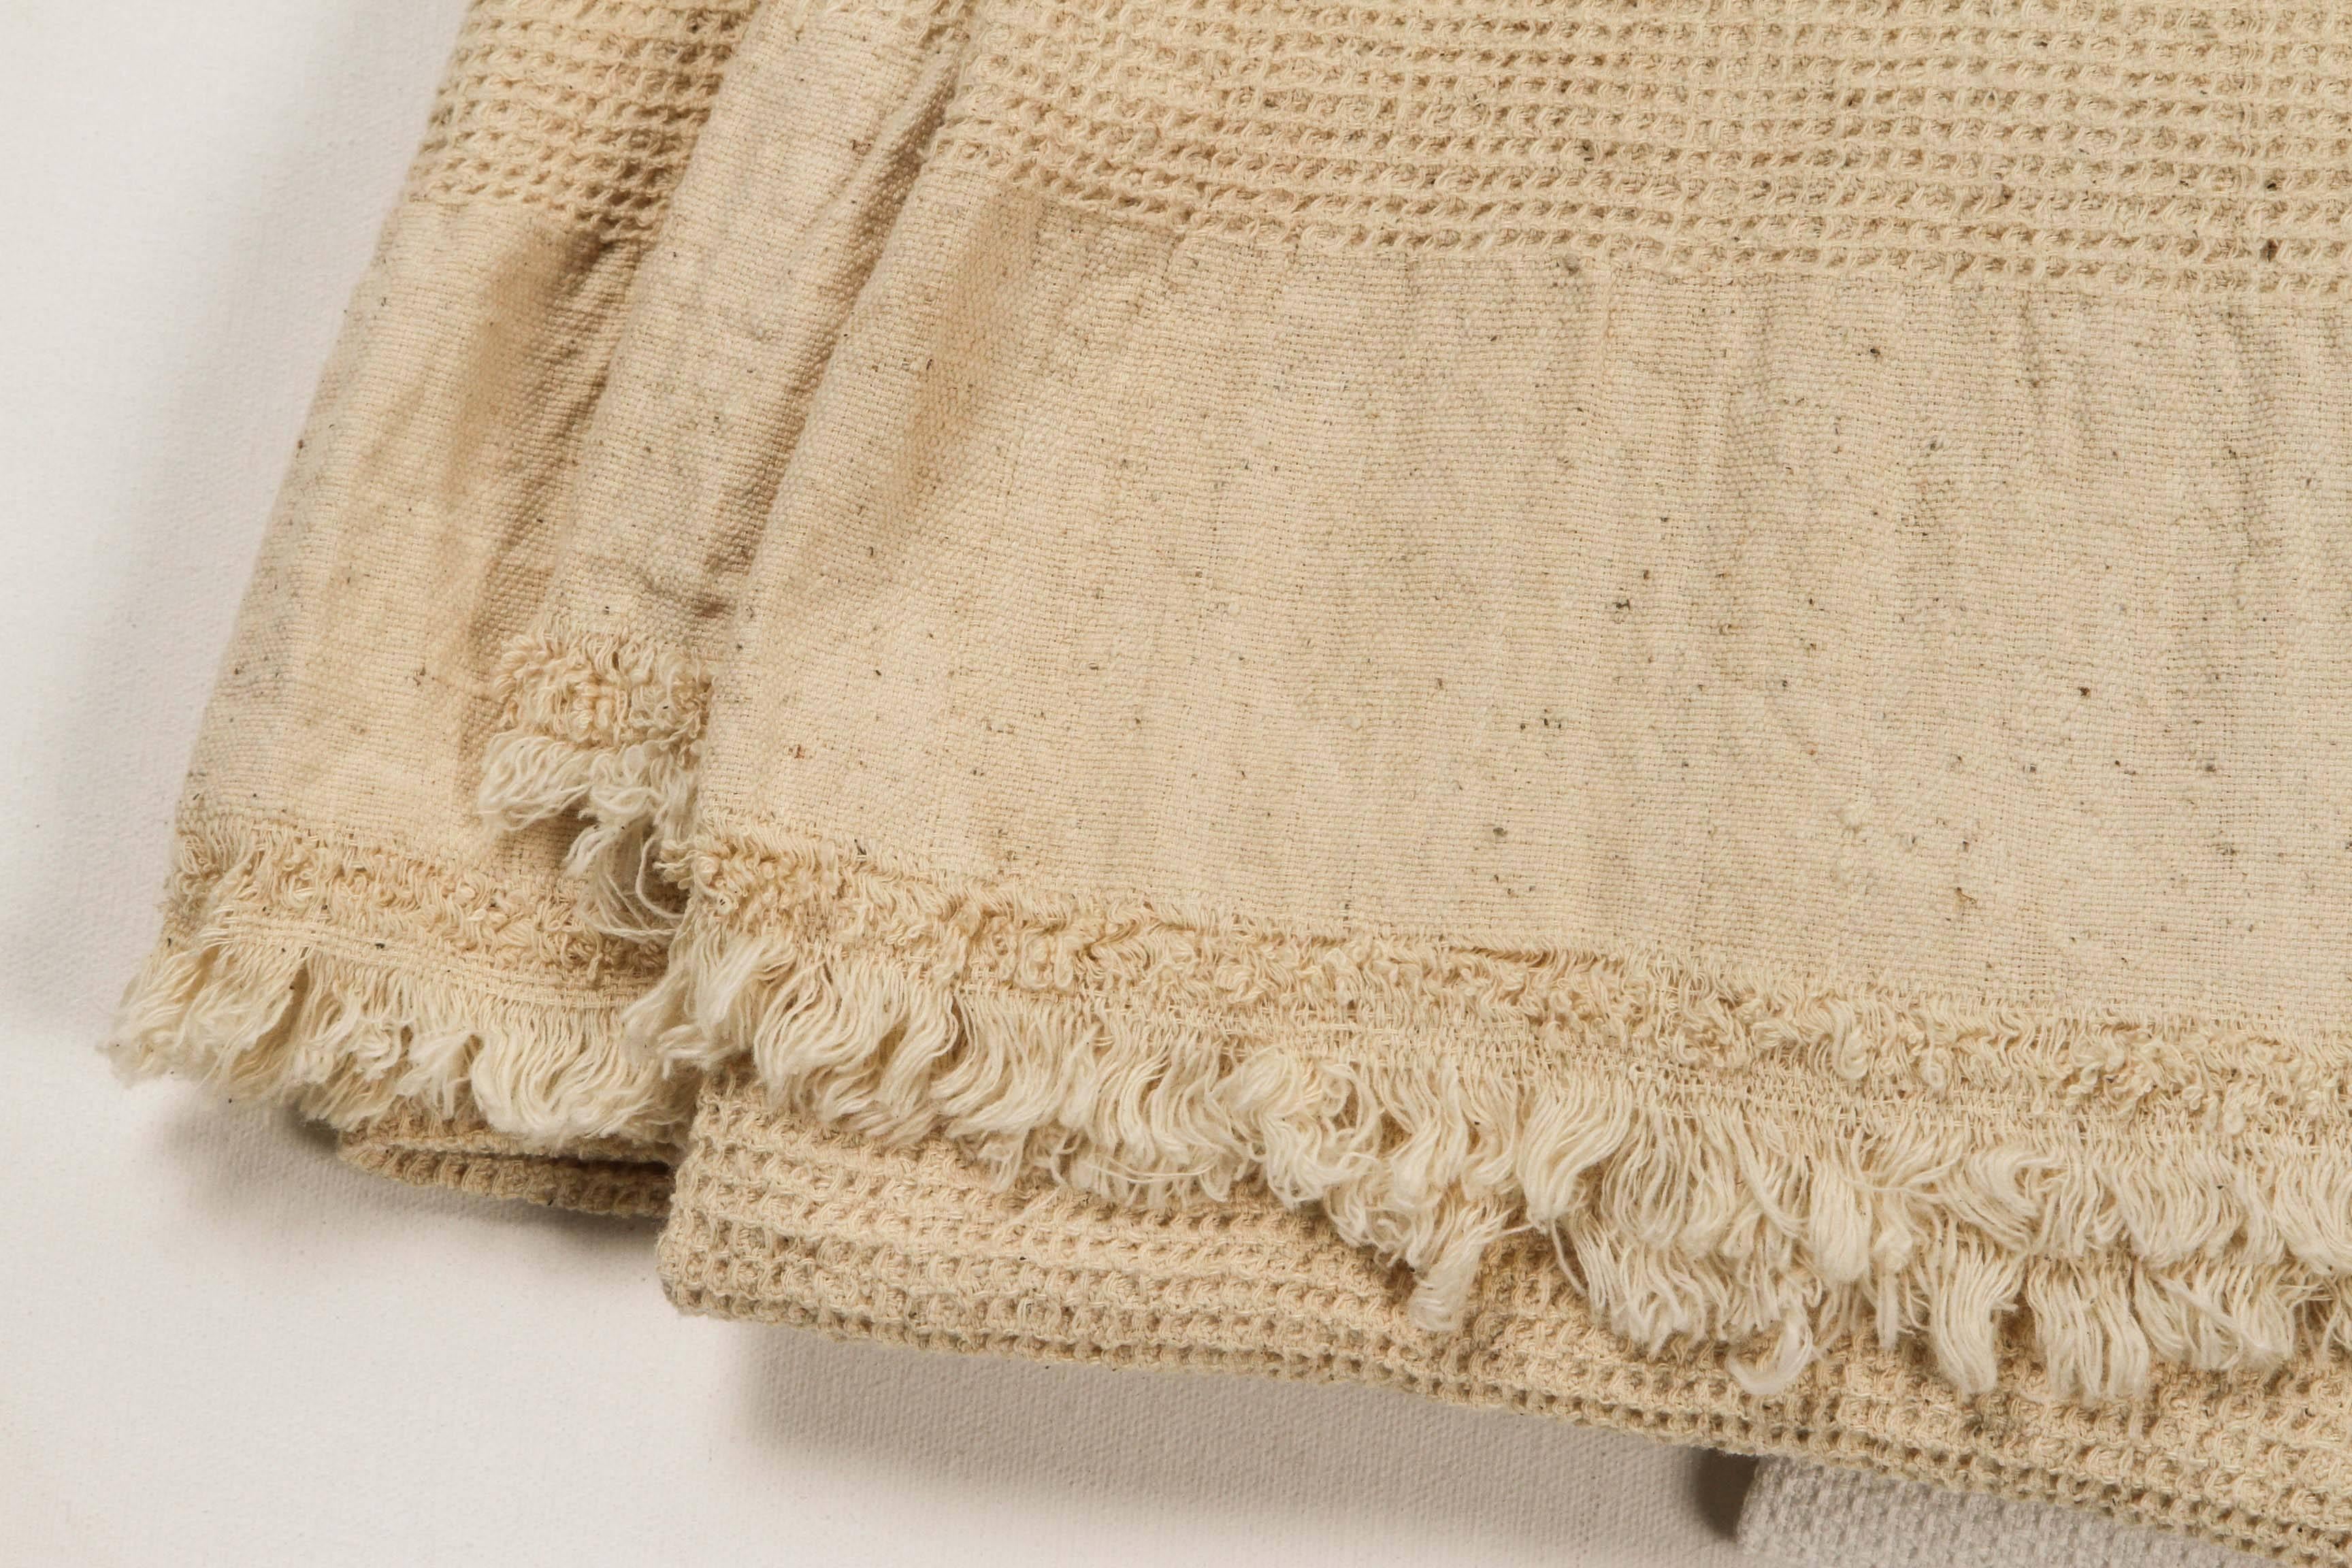 Hand spun and handwoven Khadi fabric cottons. Inspired by Gandhi and the Indian independence movement. Still made today and sold in Khadi shops all over India.

Waffle towels are light weight, totally absorbent and useful as beach, spa or regular